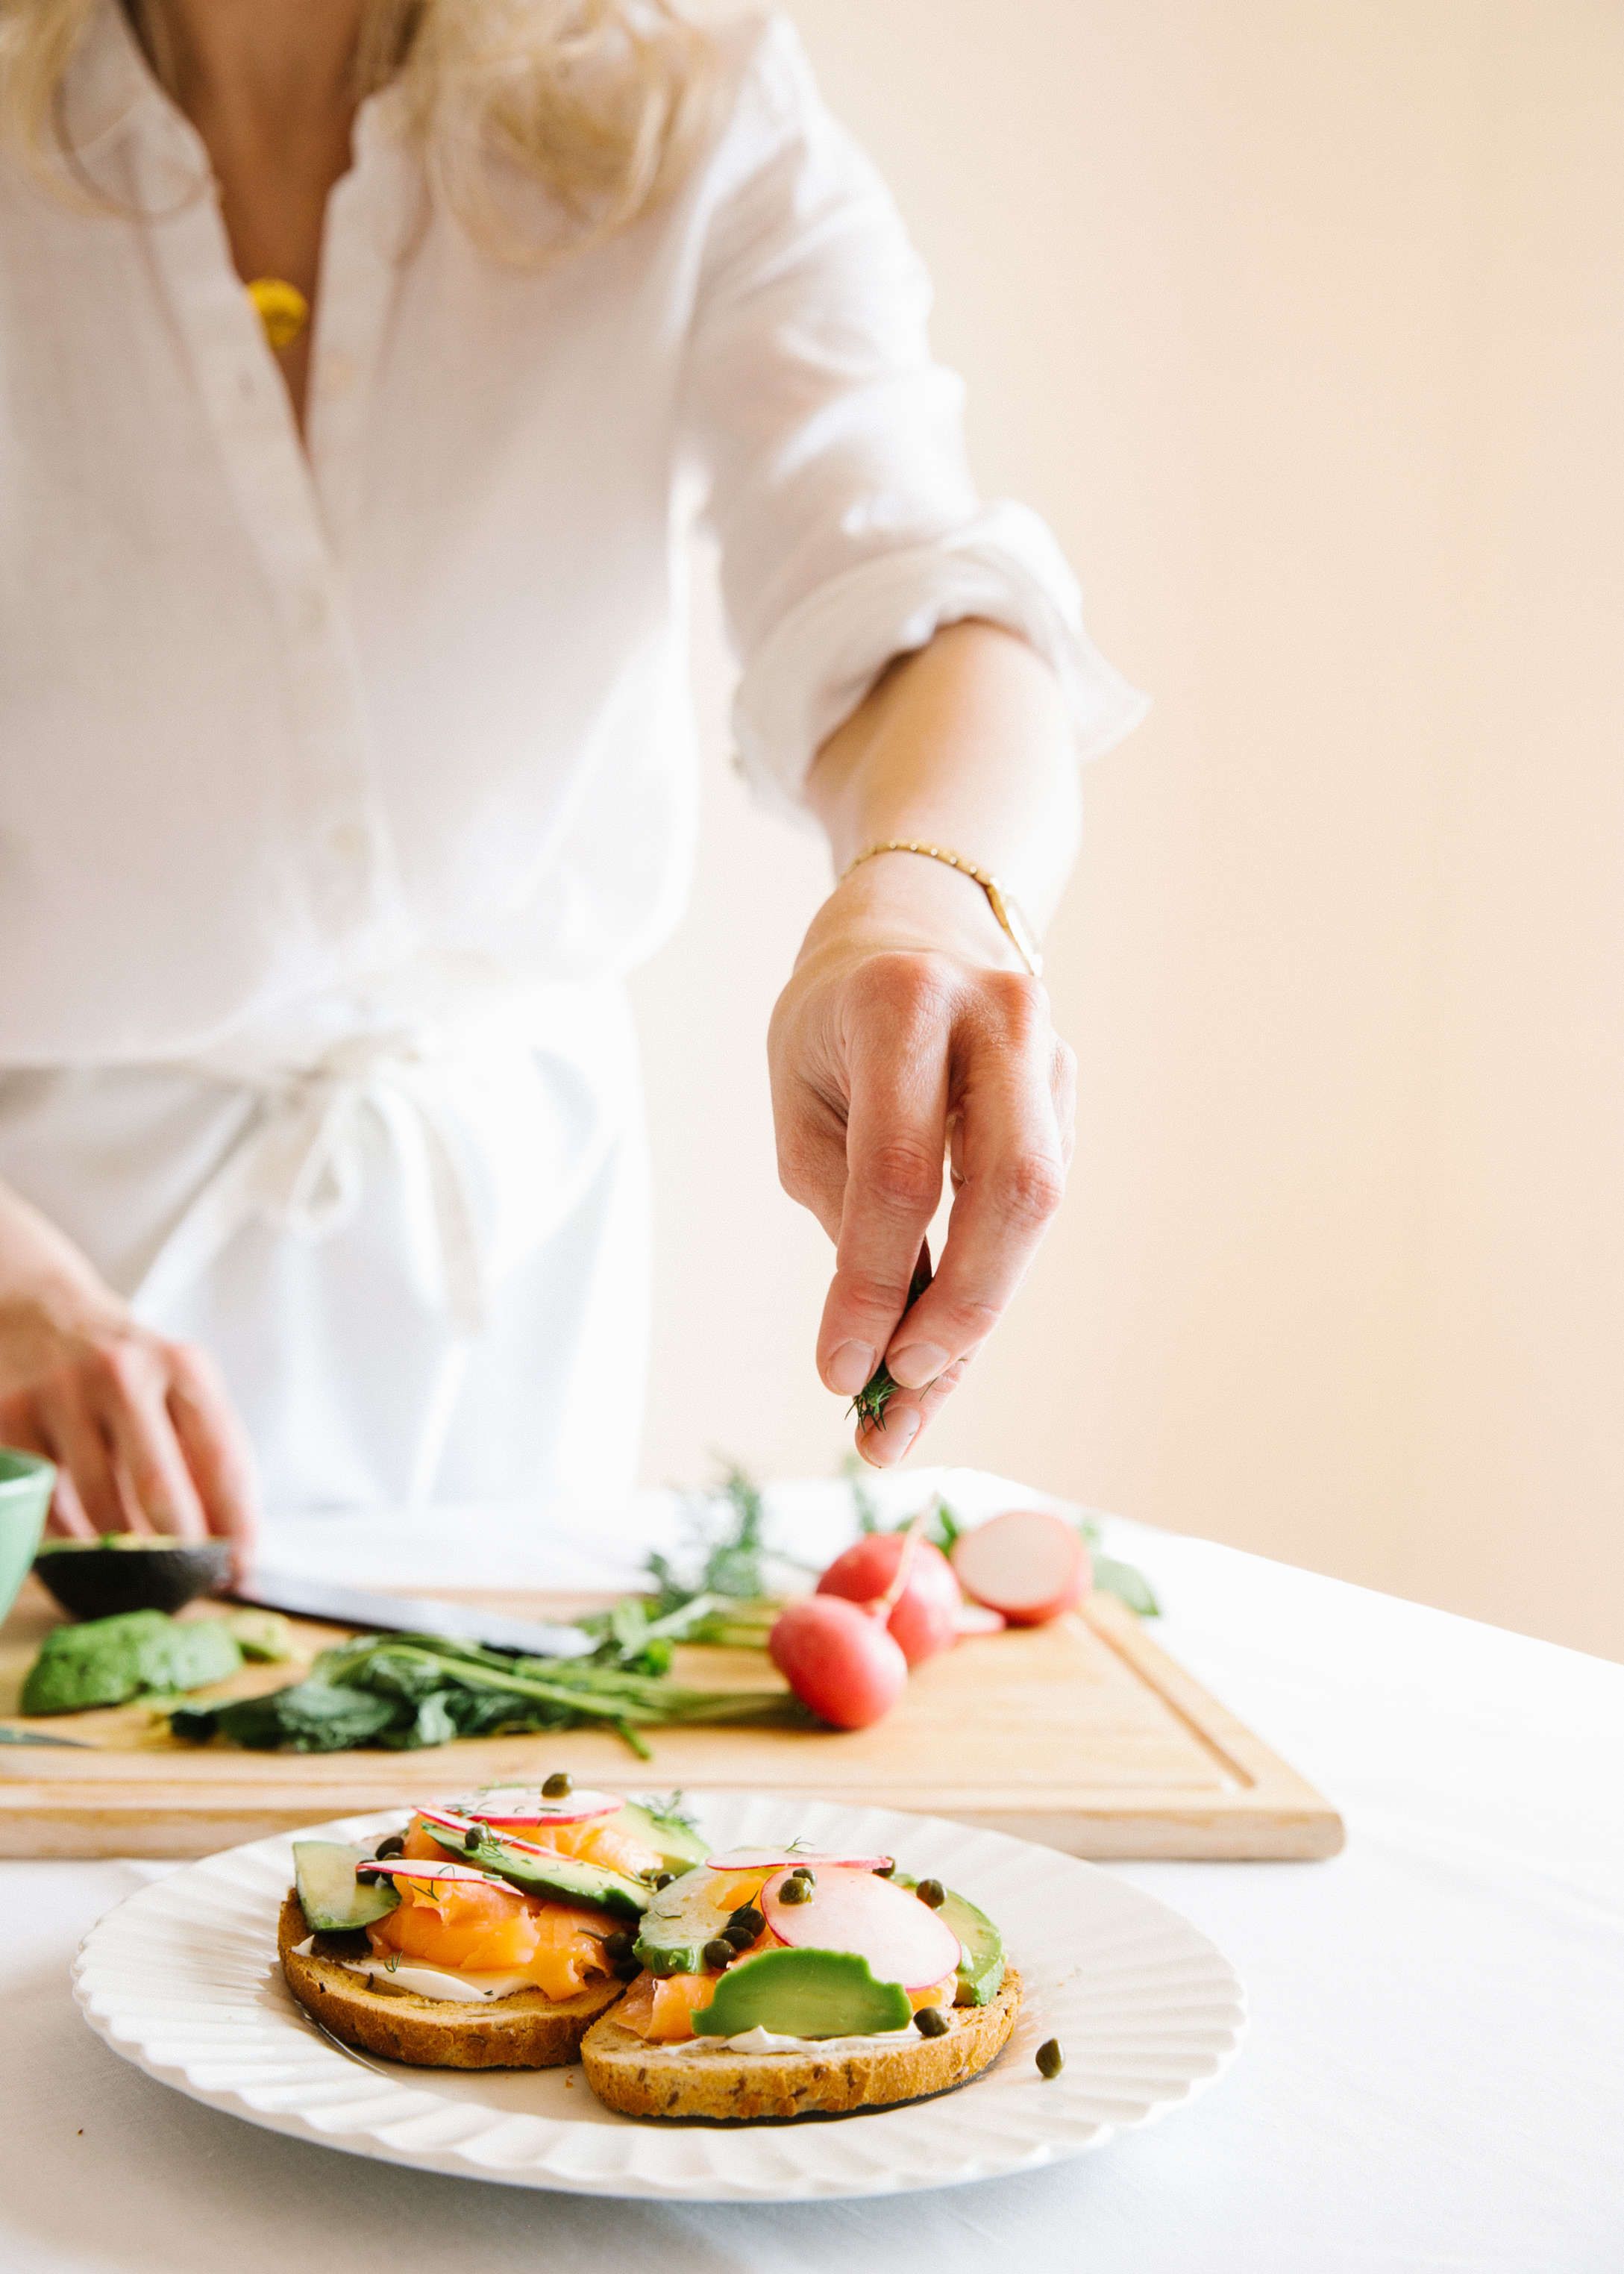 chef wearing white shirt and apron sprinkling capers onto a tartine of salmon, avocado, and radishes on white plate with cutting board in background